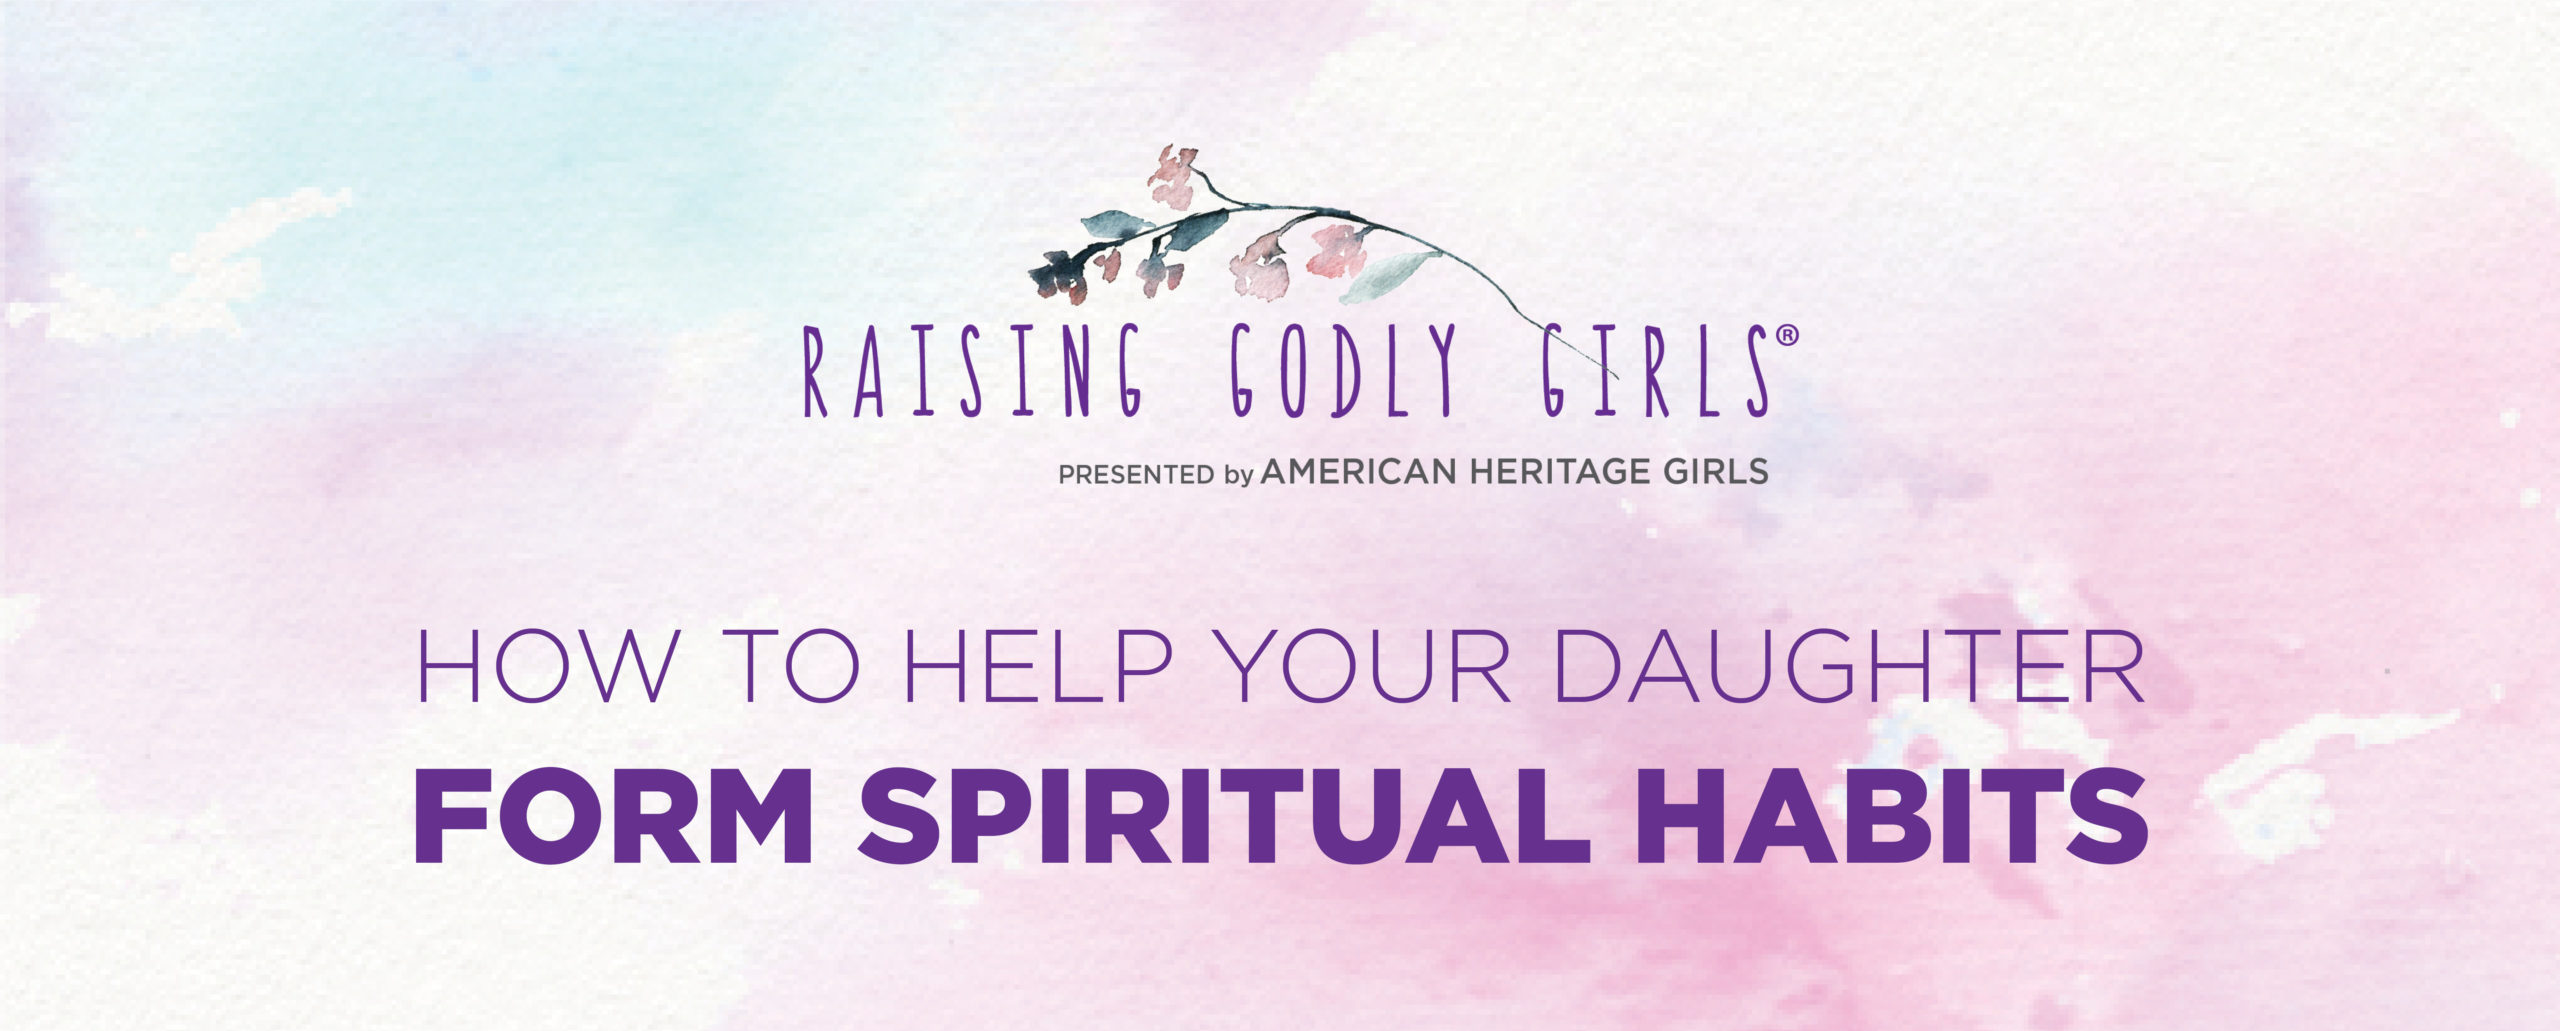 How to Help Your Daughter Form Spiritual Habits